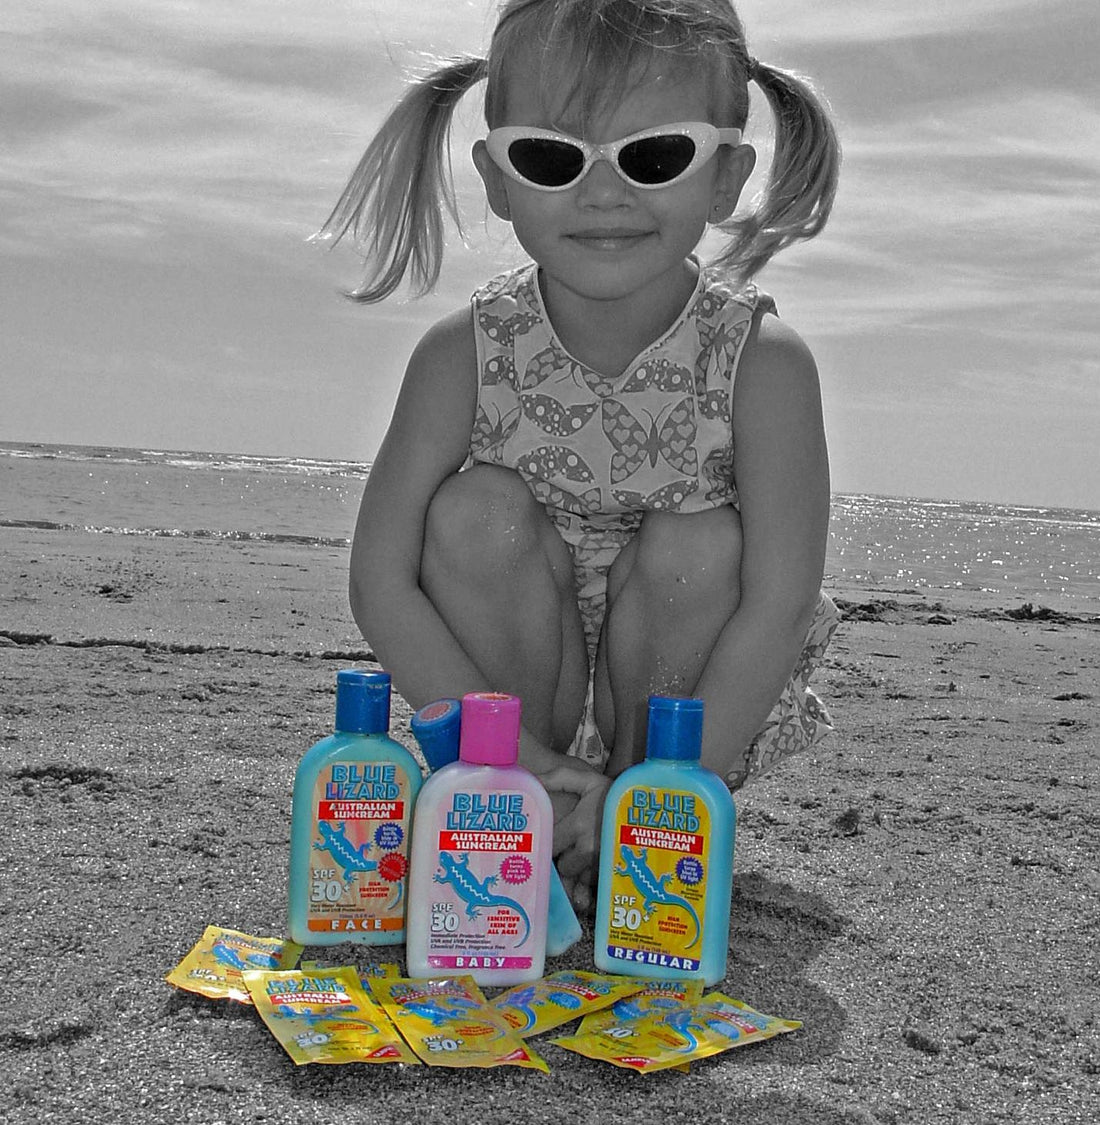 Learn what to look for when buying sunscreen – Coolibar